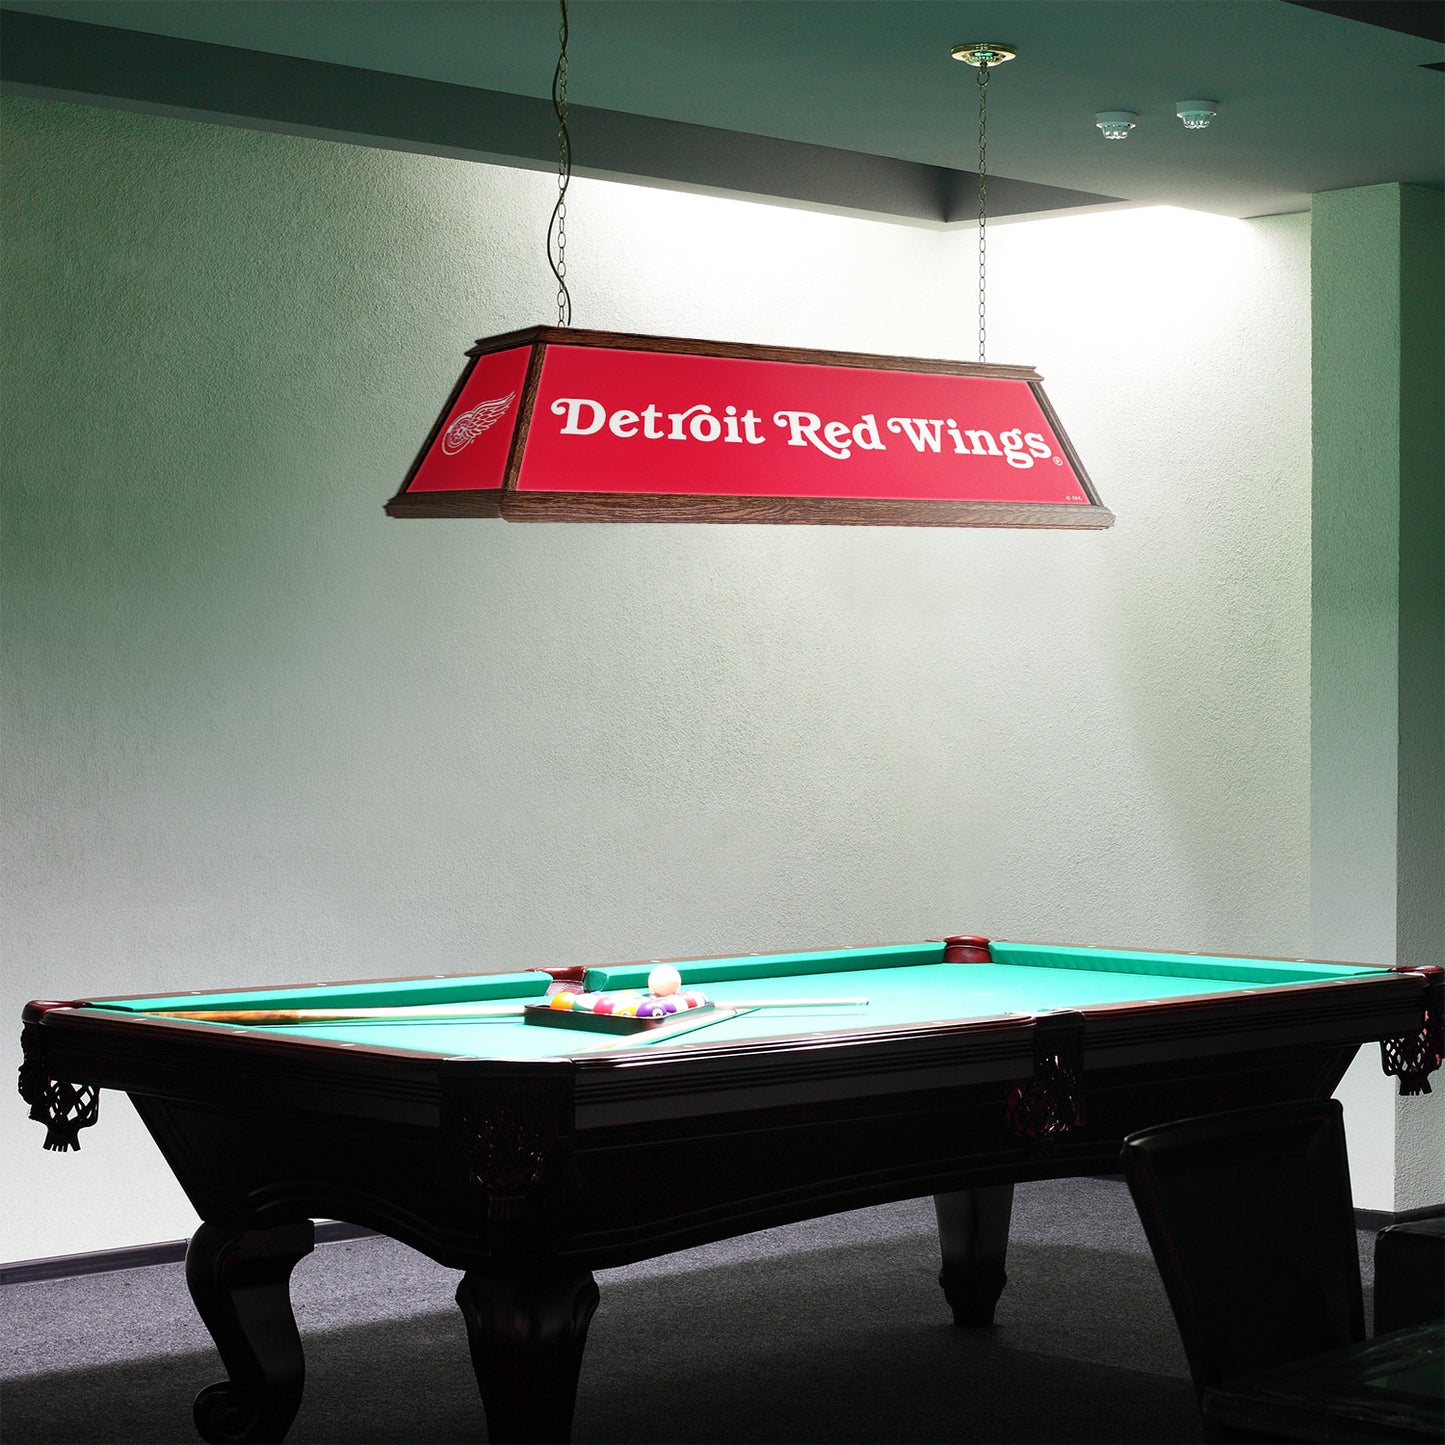 Detroit Red Wings Premium Pool Table Light Room View